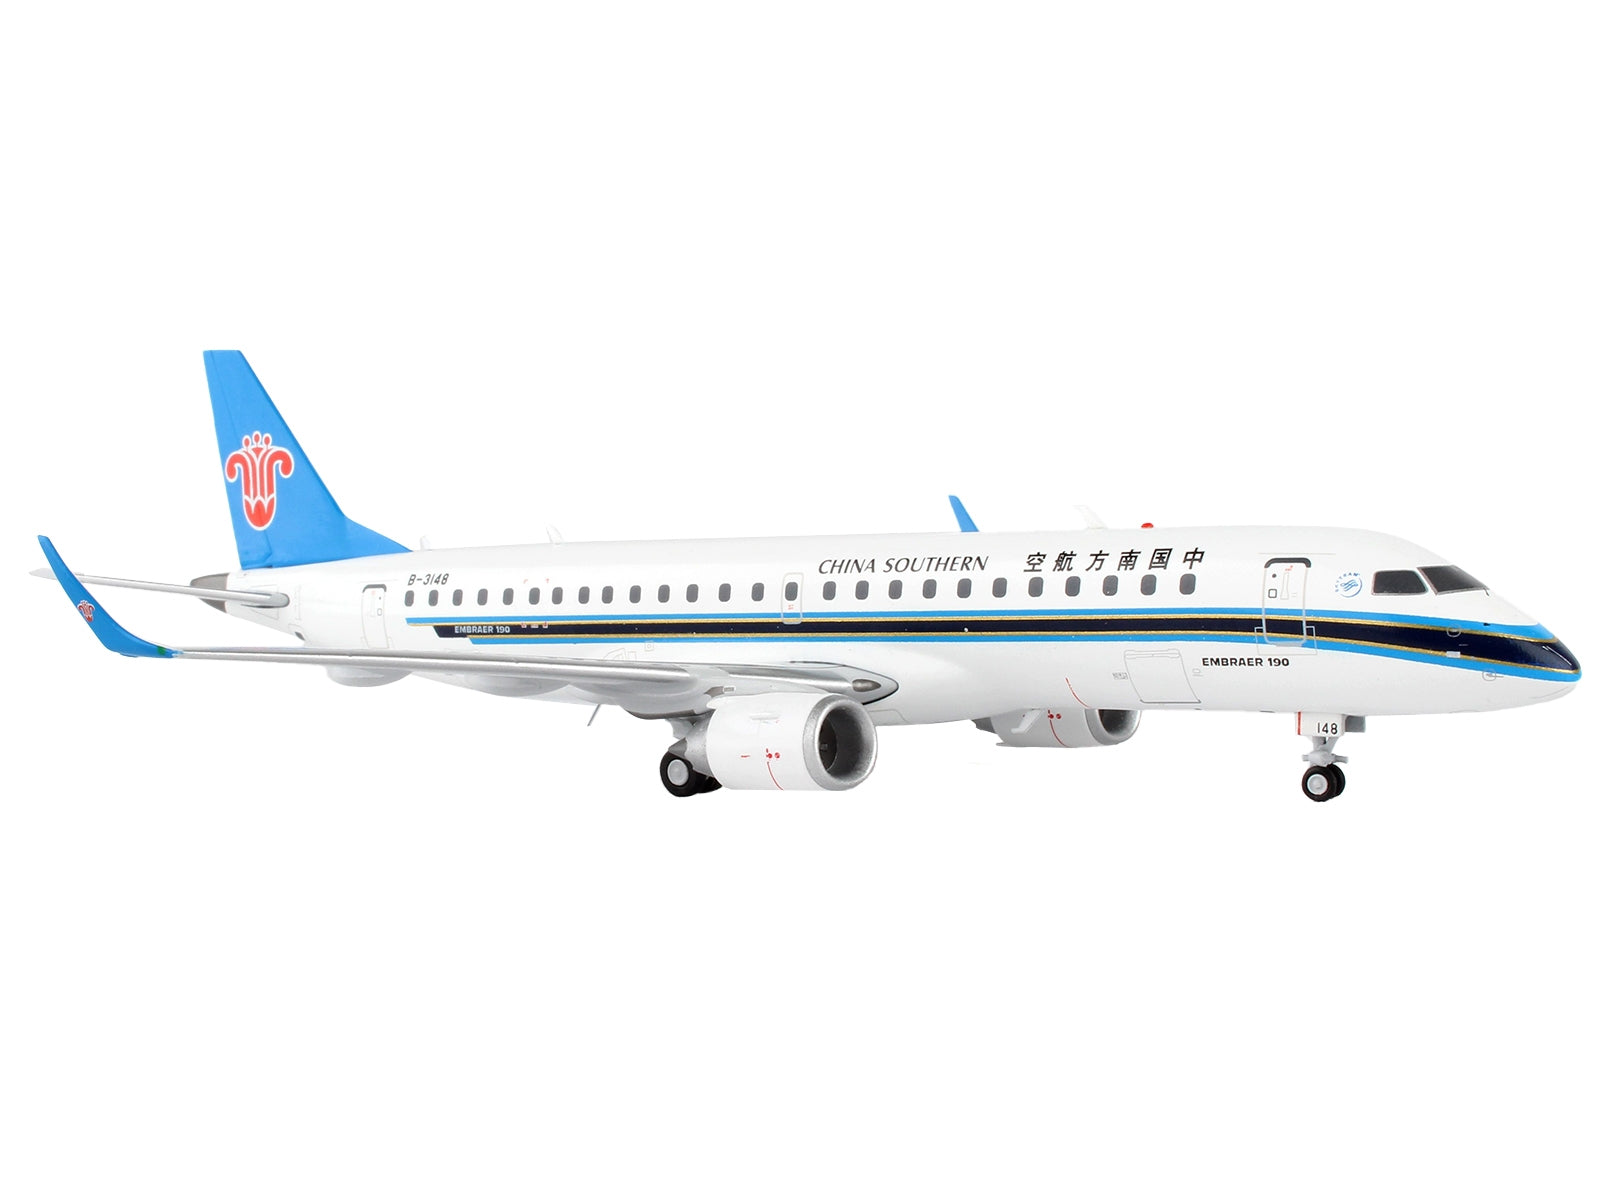 Embraer ERJ-190 Commercial Aircraft "China Southern Airlines" White with Black Stripes and Blue Tail